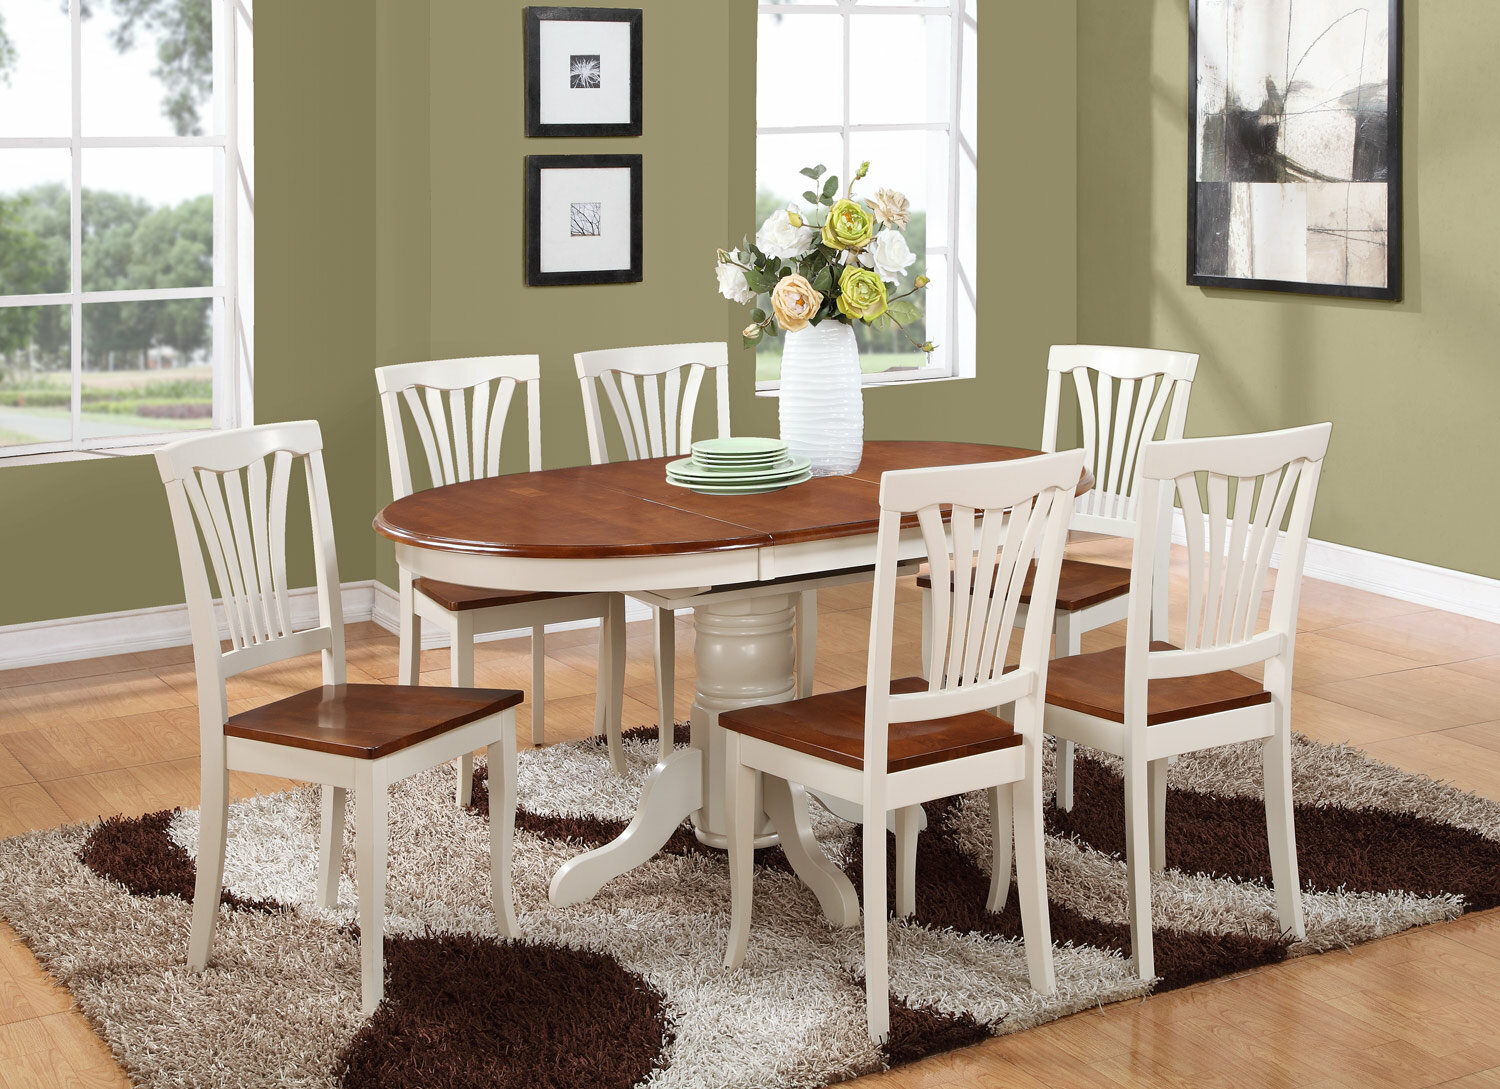 East West Furniture KEAV5-WHI-W 5PC Oval Dining Set with Single Pedestal with 18 in. leaf Table and 4 wood seat chairs